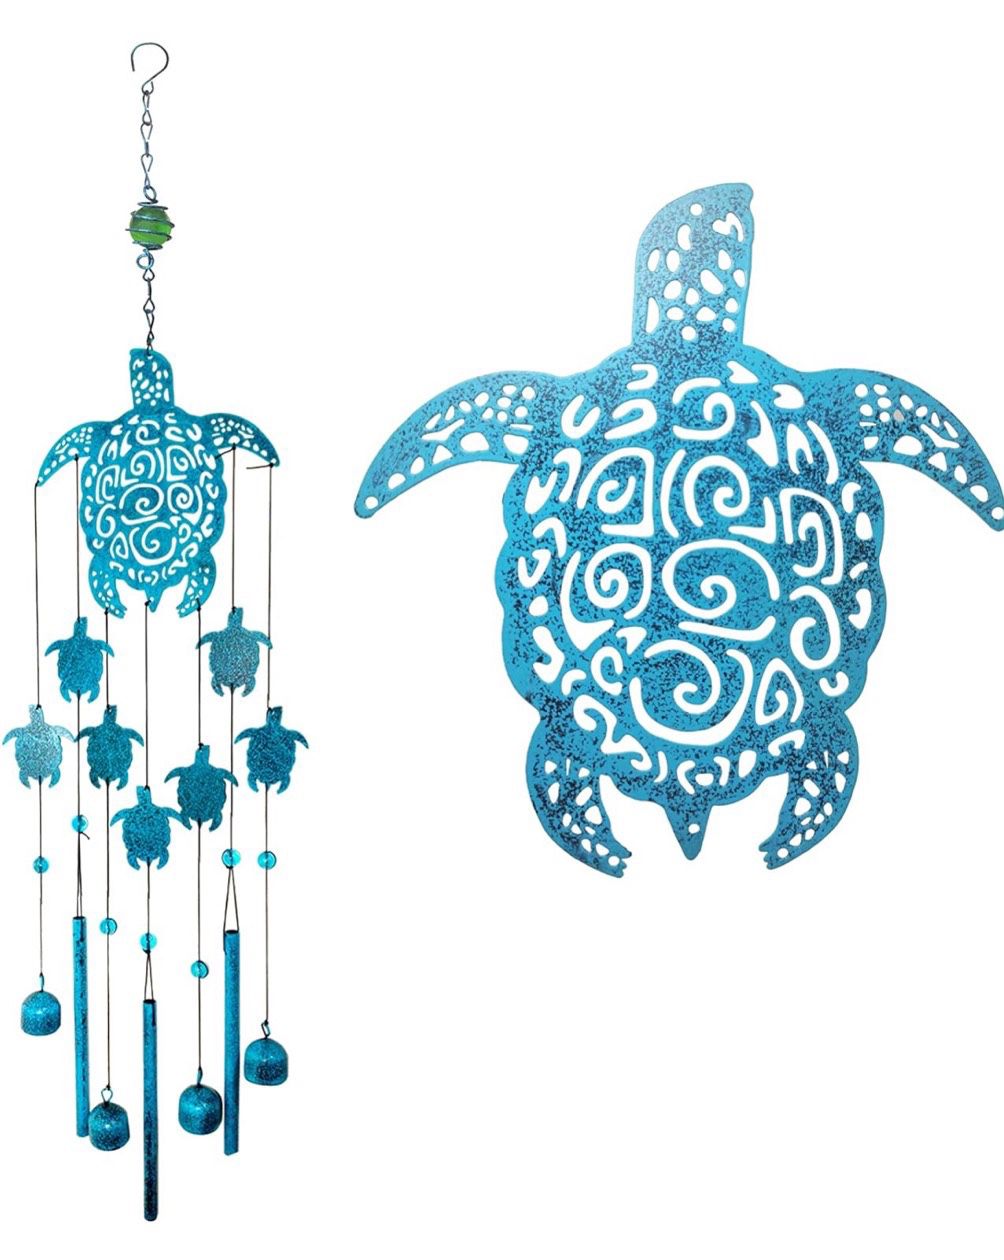 OKAIMEIMEIO Wind Chimes, Sea Turtle Wind Chimes for Outside, Memorial Gift for Mom, Wind Chimes Outdoor Clearance, Garden Decor, Turtle Lover Gifts